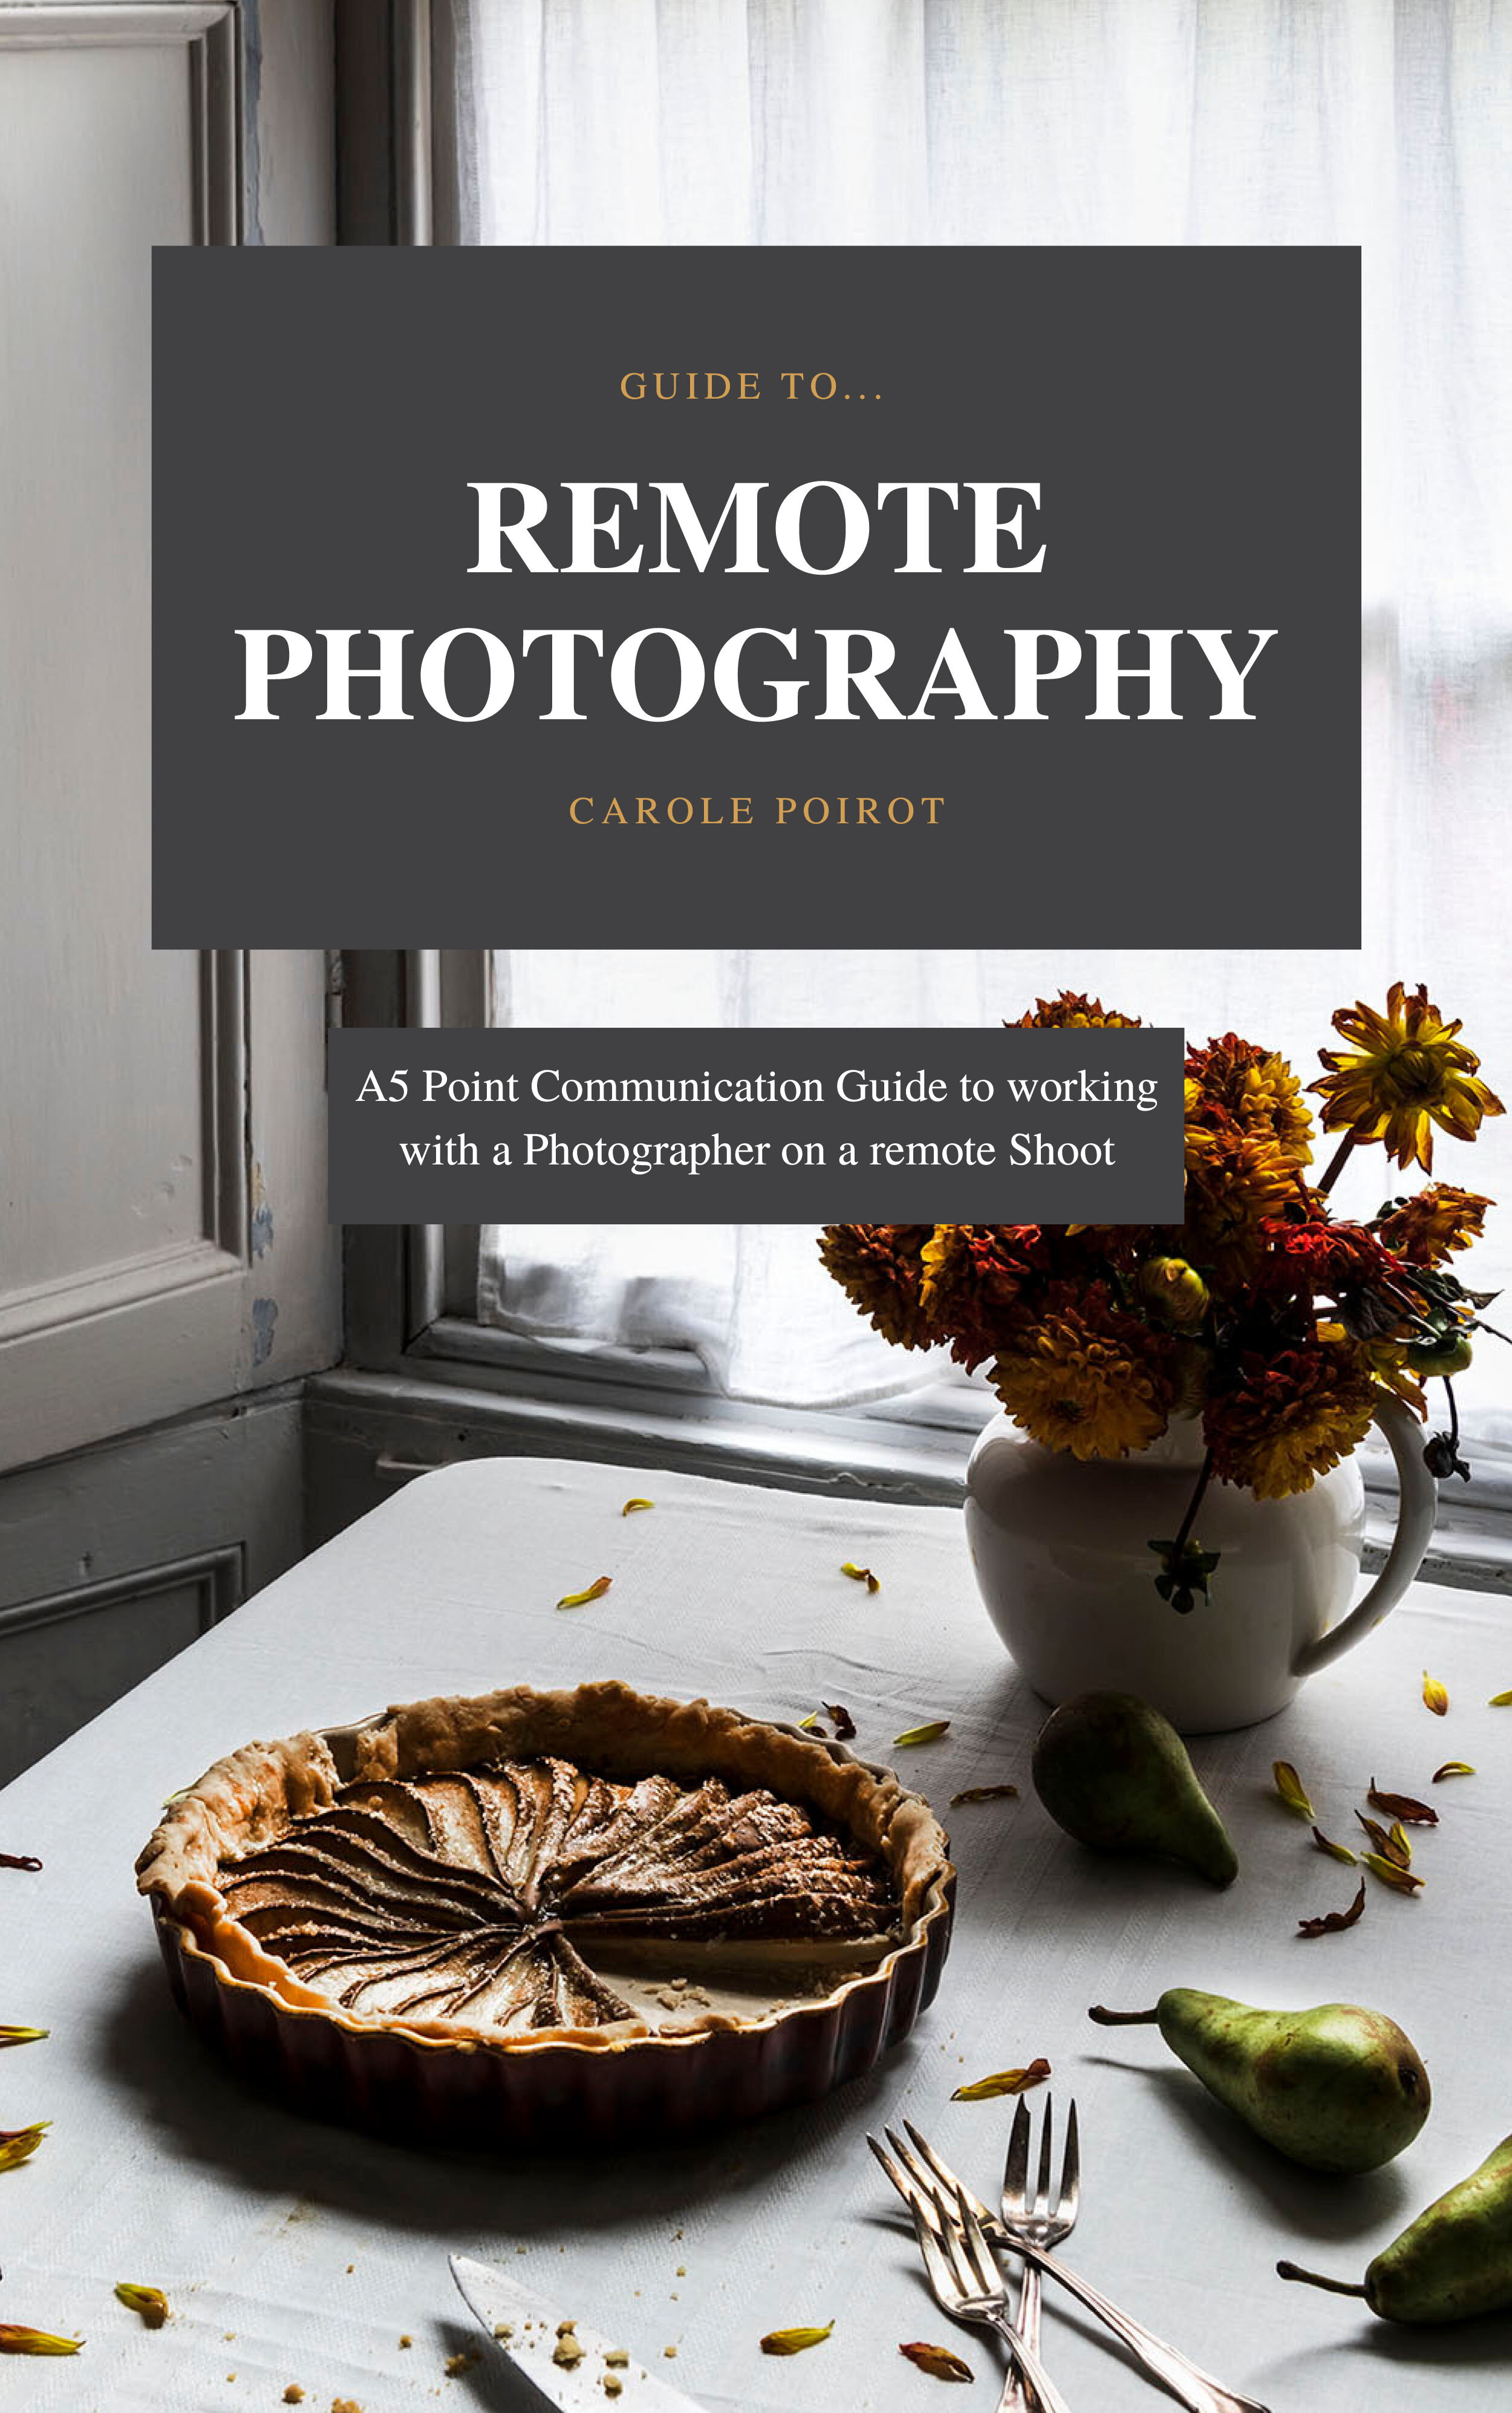 Remote Photography Guide.jpg